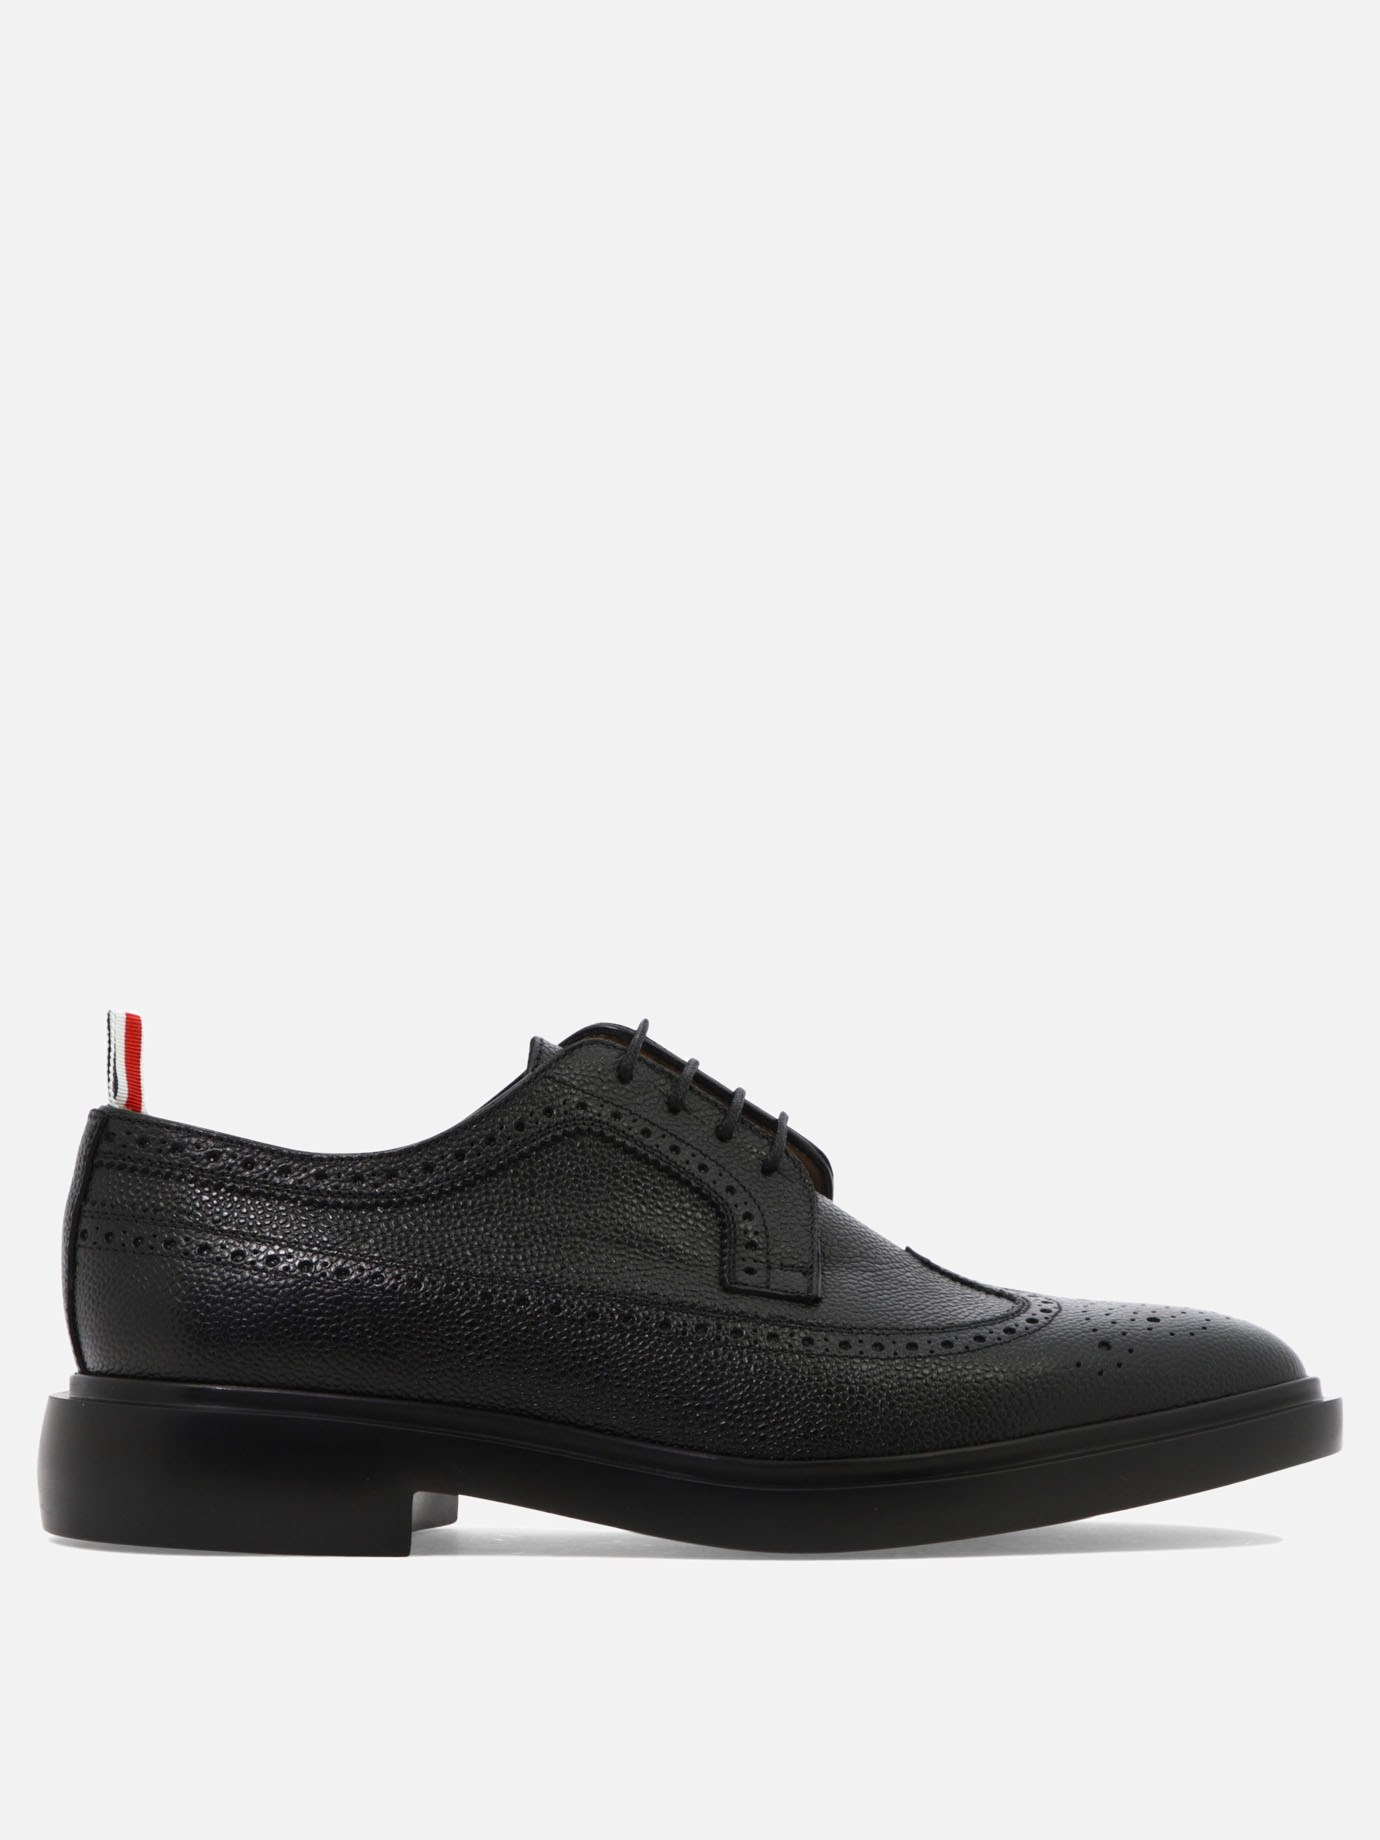  Classic Longwing  lace-up shoesby Thom Browne - 4